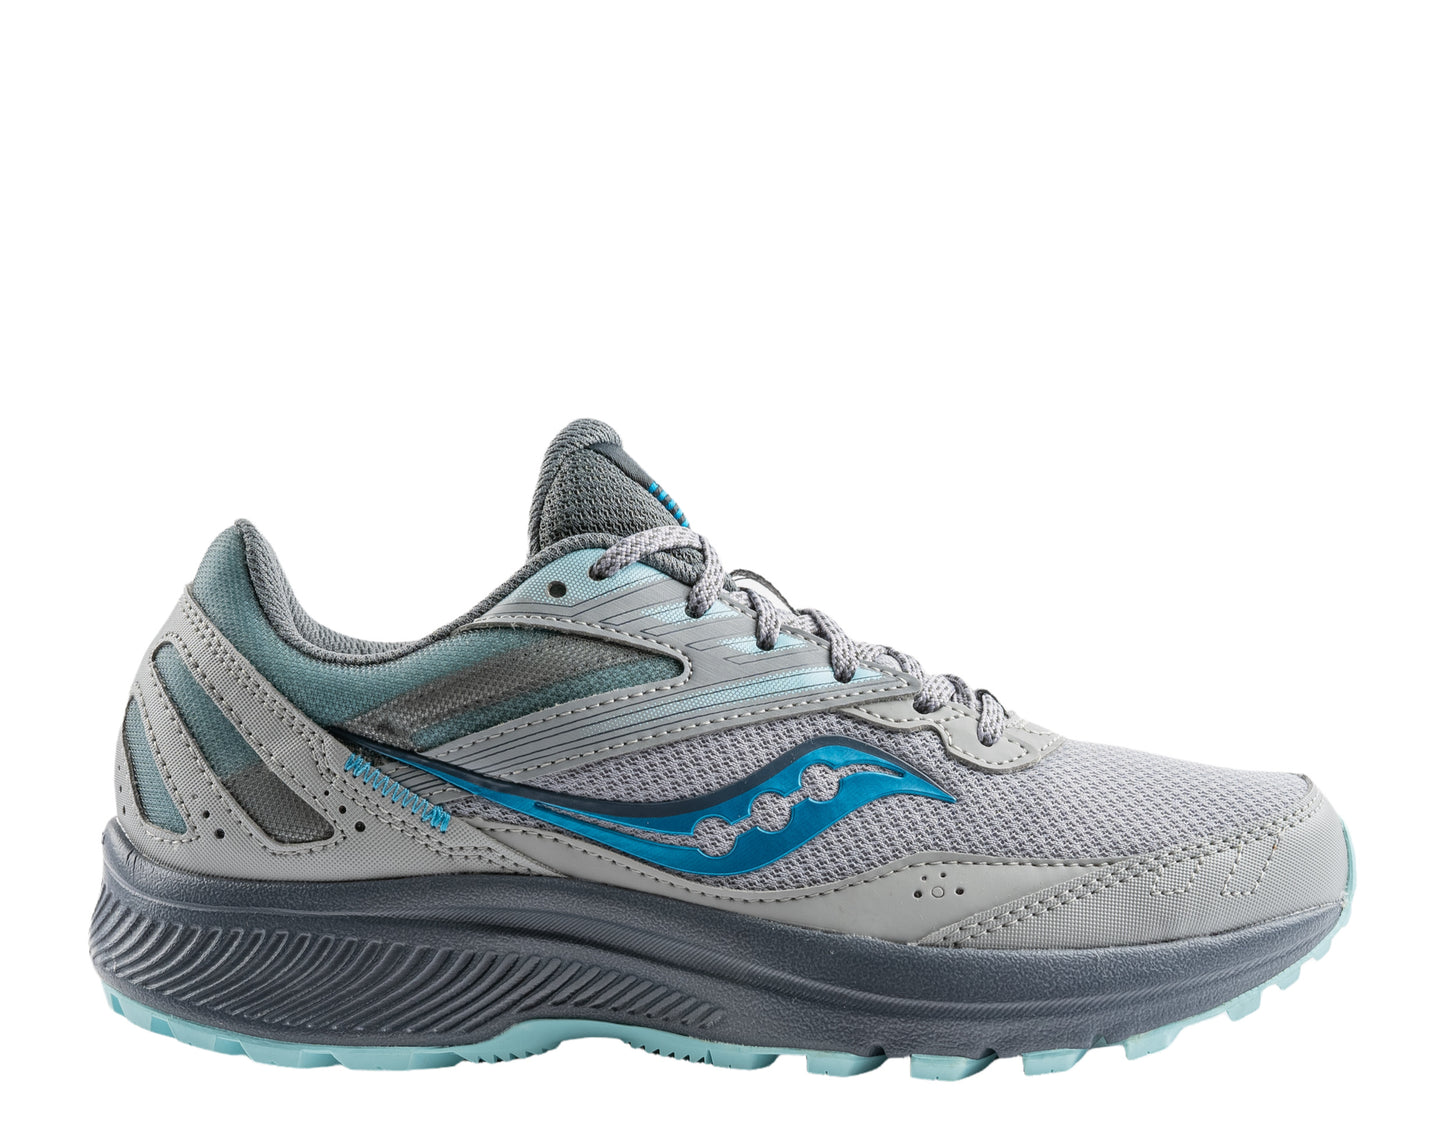 Saucony Cohesion TR15 Women's Running Shoes